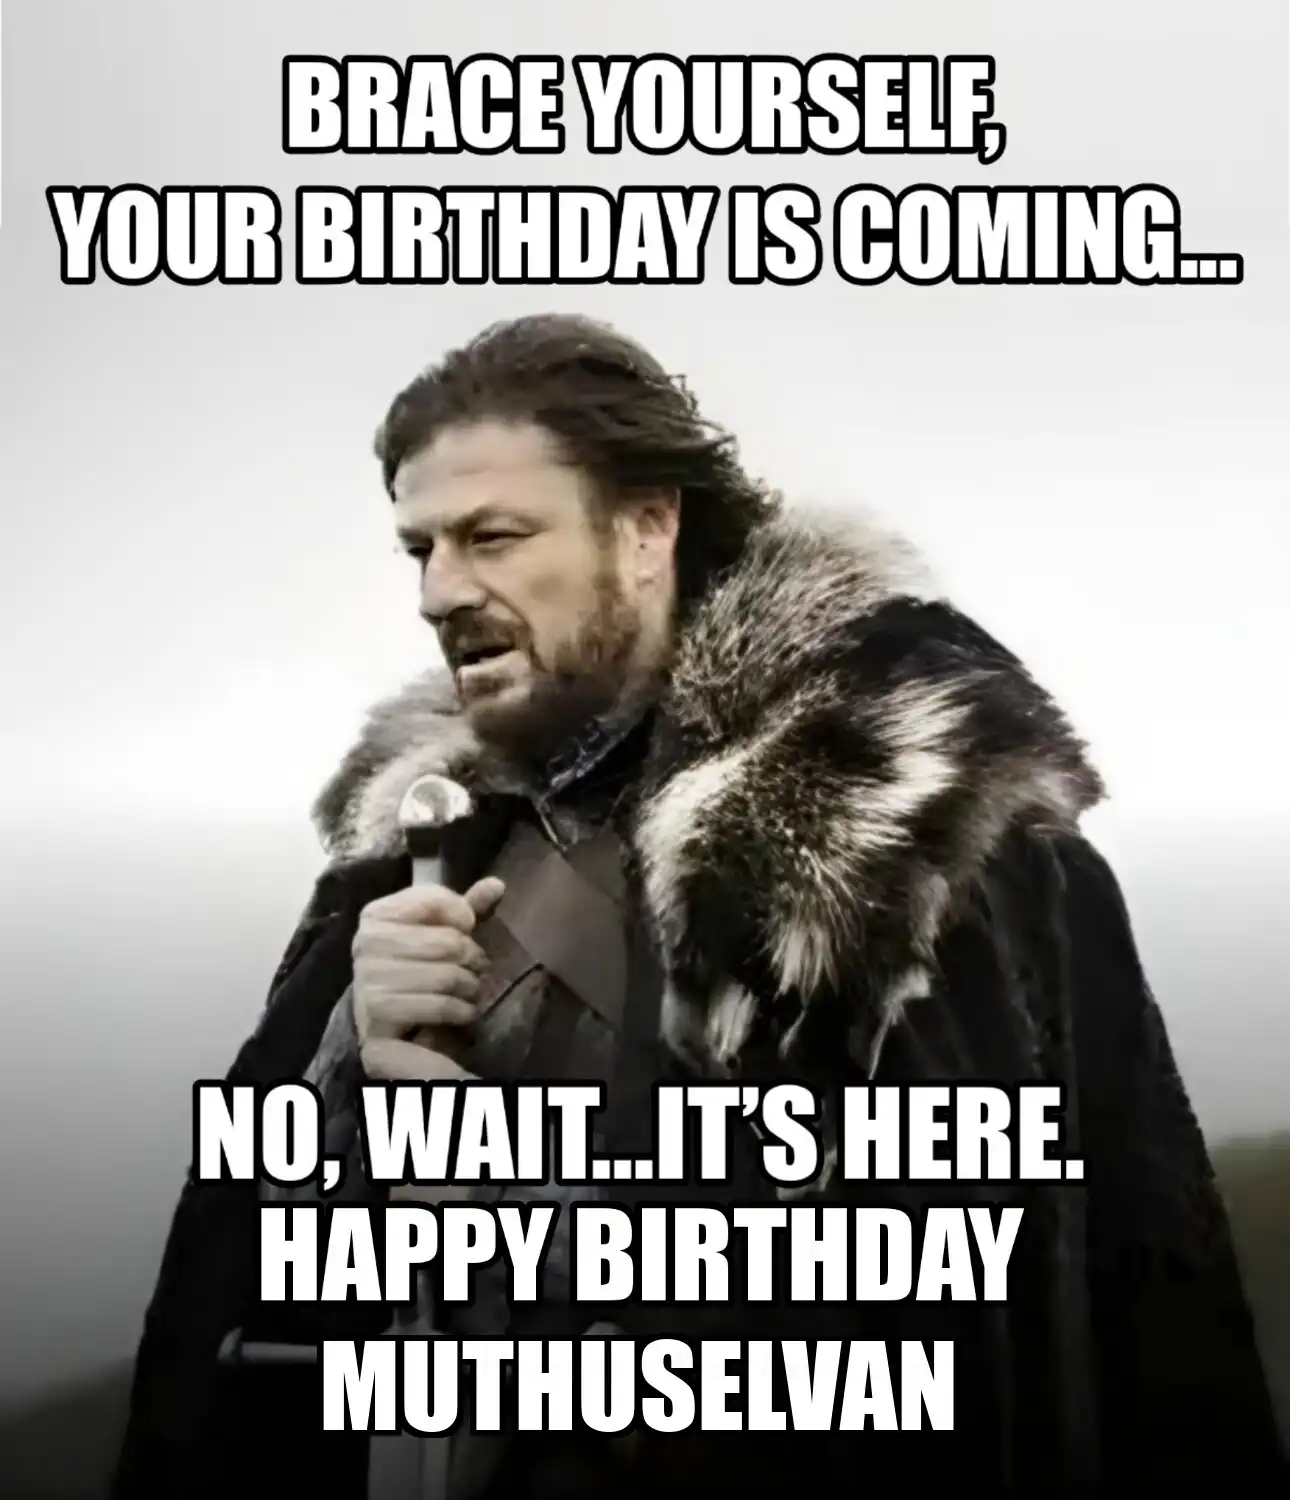 Happy Birthday Muthuselvan Brace Yourself Your Birthday Is Coming Meme